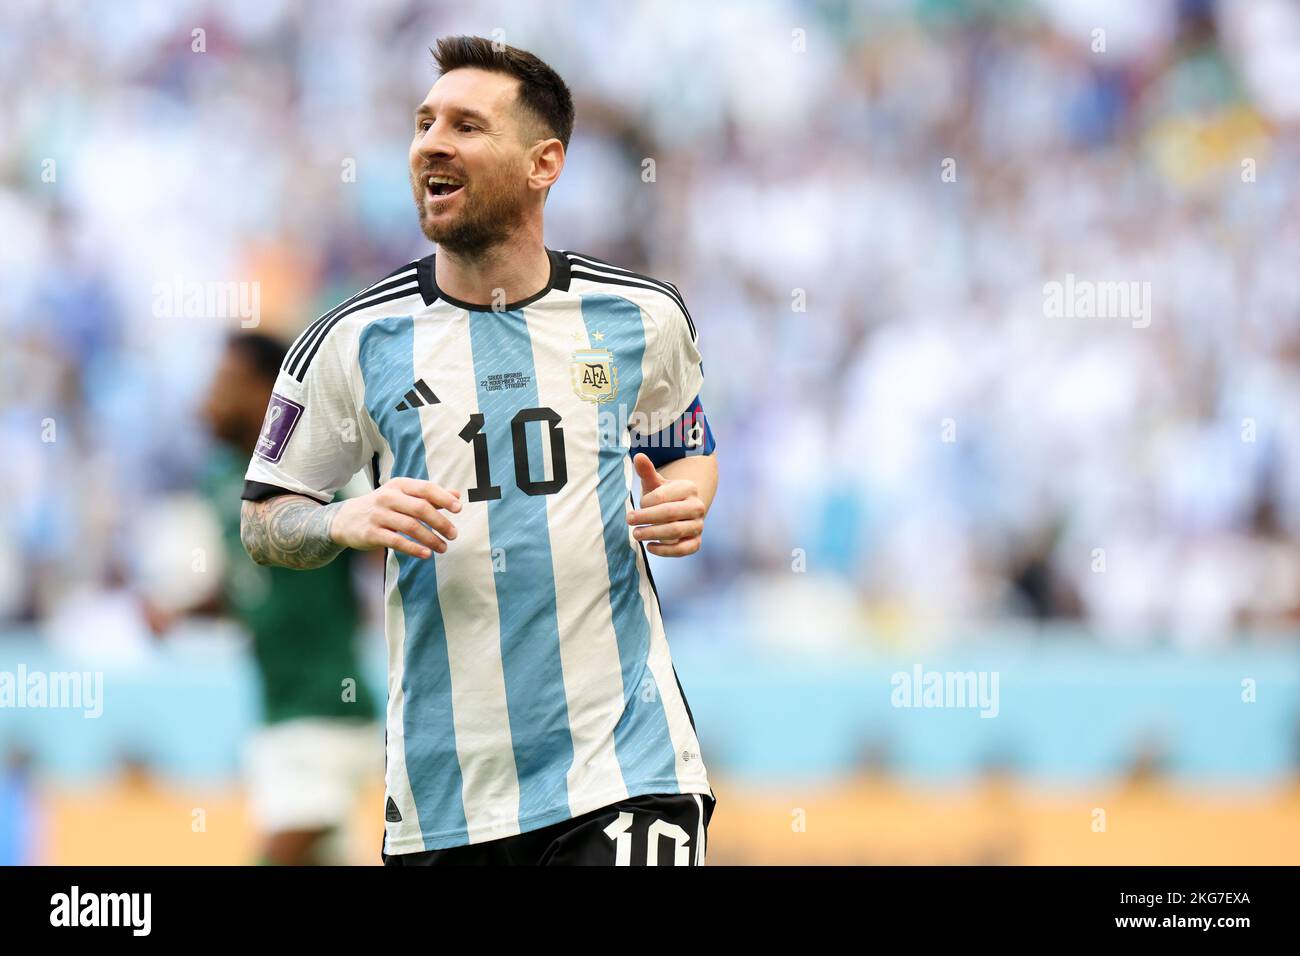 Lusail, Qatar. 22nd Nov, 2022. Lionel Messi of Argentina celebrates after scoring during the Group C match between Argentina and Saudi Arabia at the 2022 FIFA World Cup at Lusail Stadium in Lusail, Qatar, Nov. 22, 2022. Credit: Han Yan/Xinhua/Alamy Live News Stock Photo